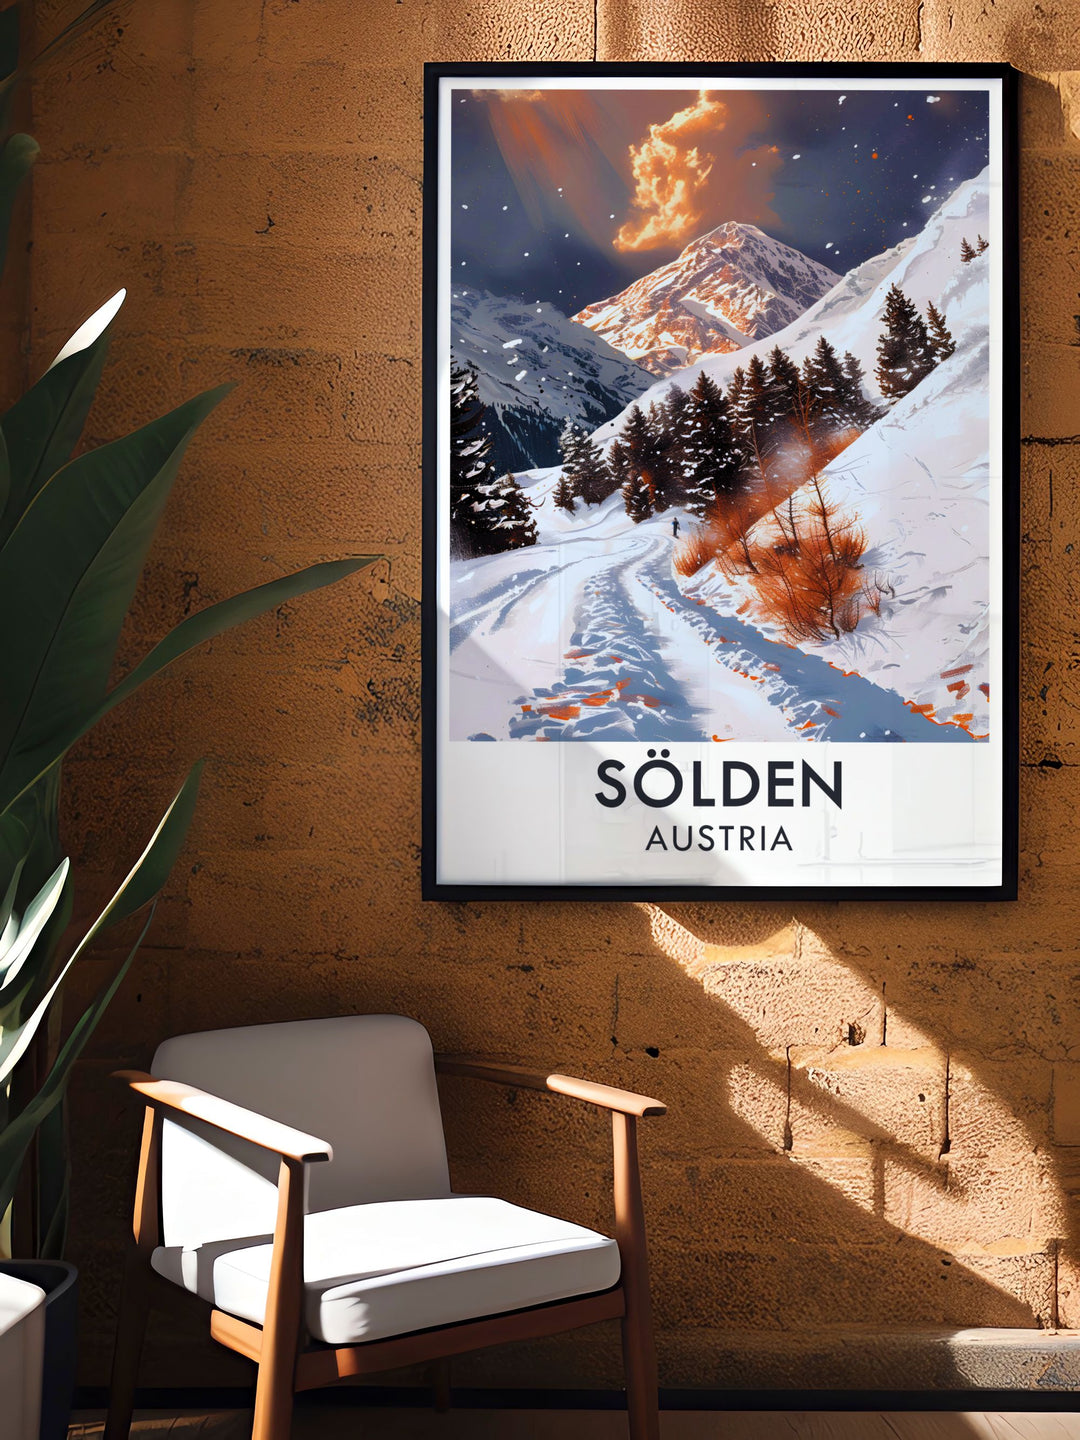 The iconic Rettenbach Glacier and the dynamic slopes of Solden are beautifully illustrated in this poster, offering a unique view of Austrias premier ski destination, perfect for art lovers and adventure enthusiasts.